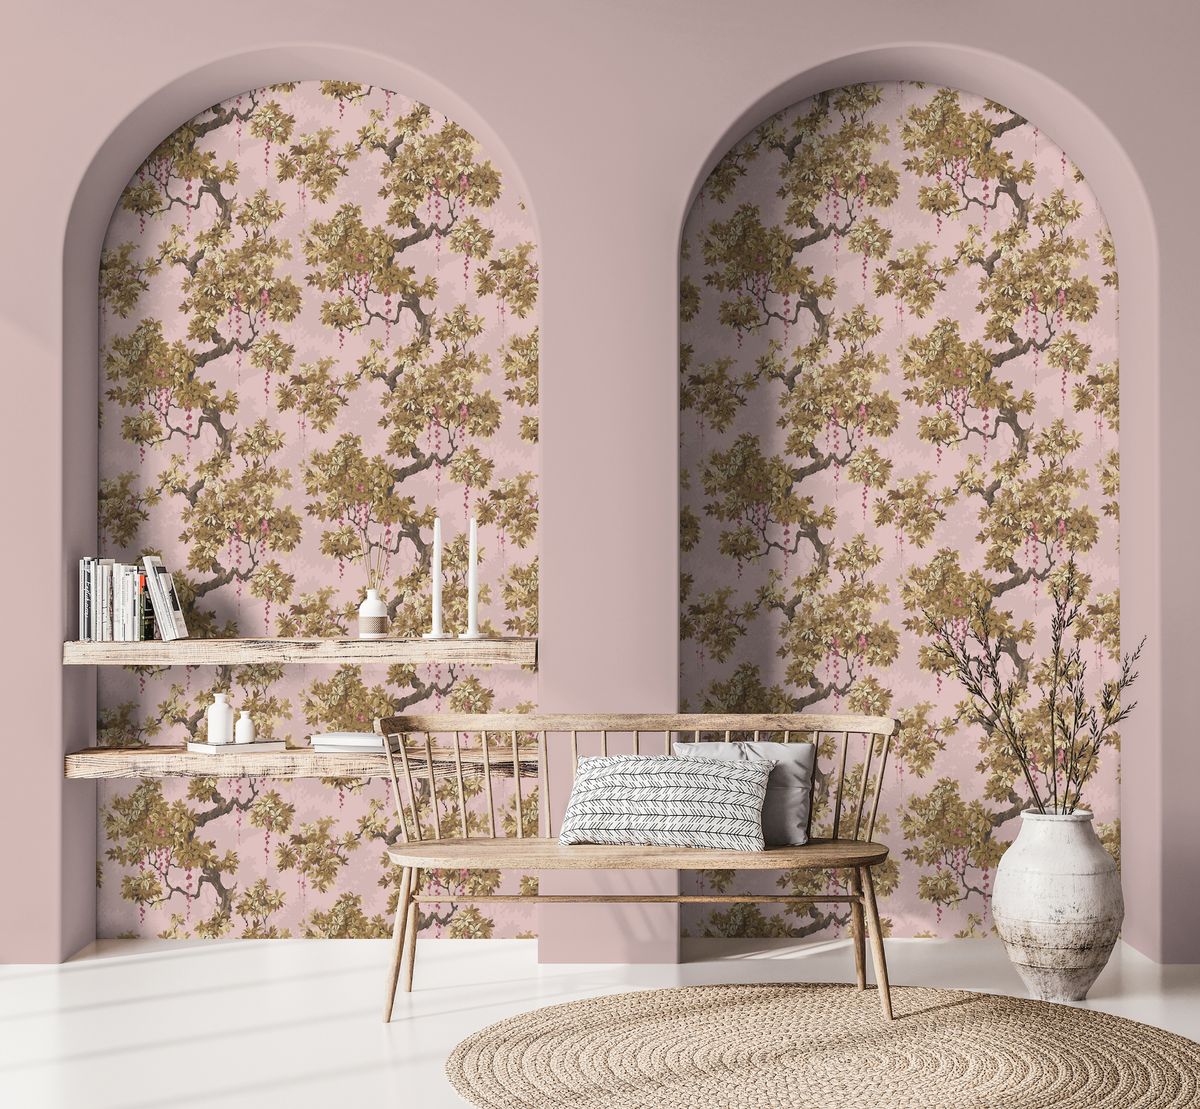 <p>Do you have arched alcoves in your living room? This more traditional, retro-style floral wallpaper is used in a wonderful way. The patterned paper really makes these arches stand out, especially set against the plain dusky pink wall. Shelves have been placed in front of it, but it's the shape that adds personality to this room and showcases the wallpaper. </p><p><em>Pictured: Floresta wallpaper in pink; Pink Cloud emulsion, both <a href="https://www.woodchipandmagnolia.co.uk/">Woodchip & Magnolia</a></em></p>